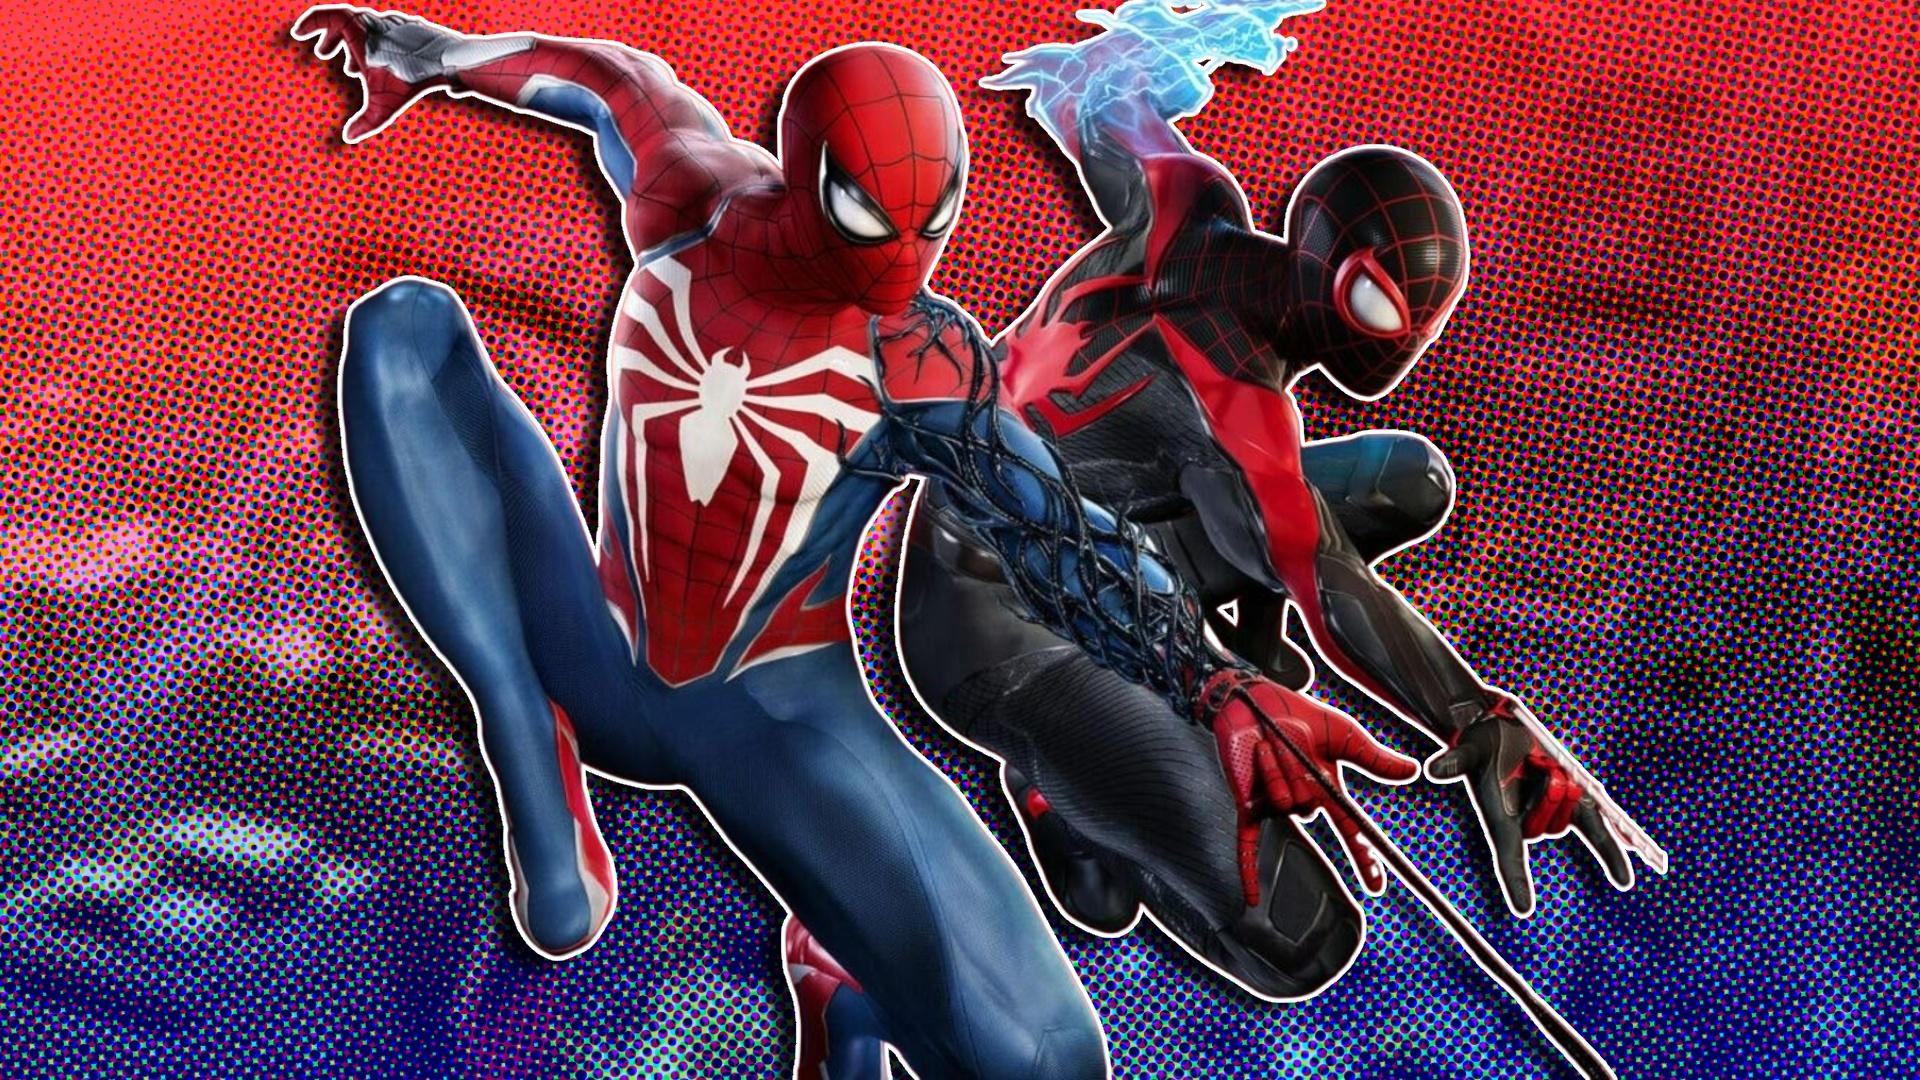 The Amazing Spider-Man 2 Potentially Cancelled on Xbox One - IGN